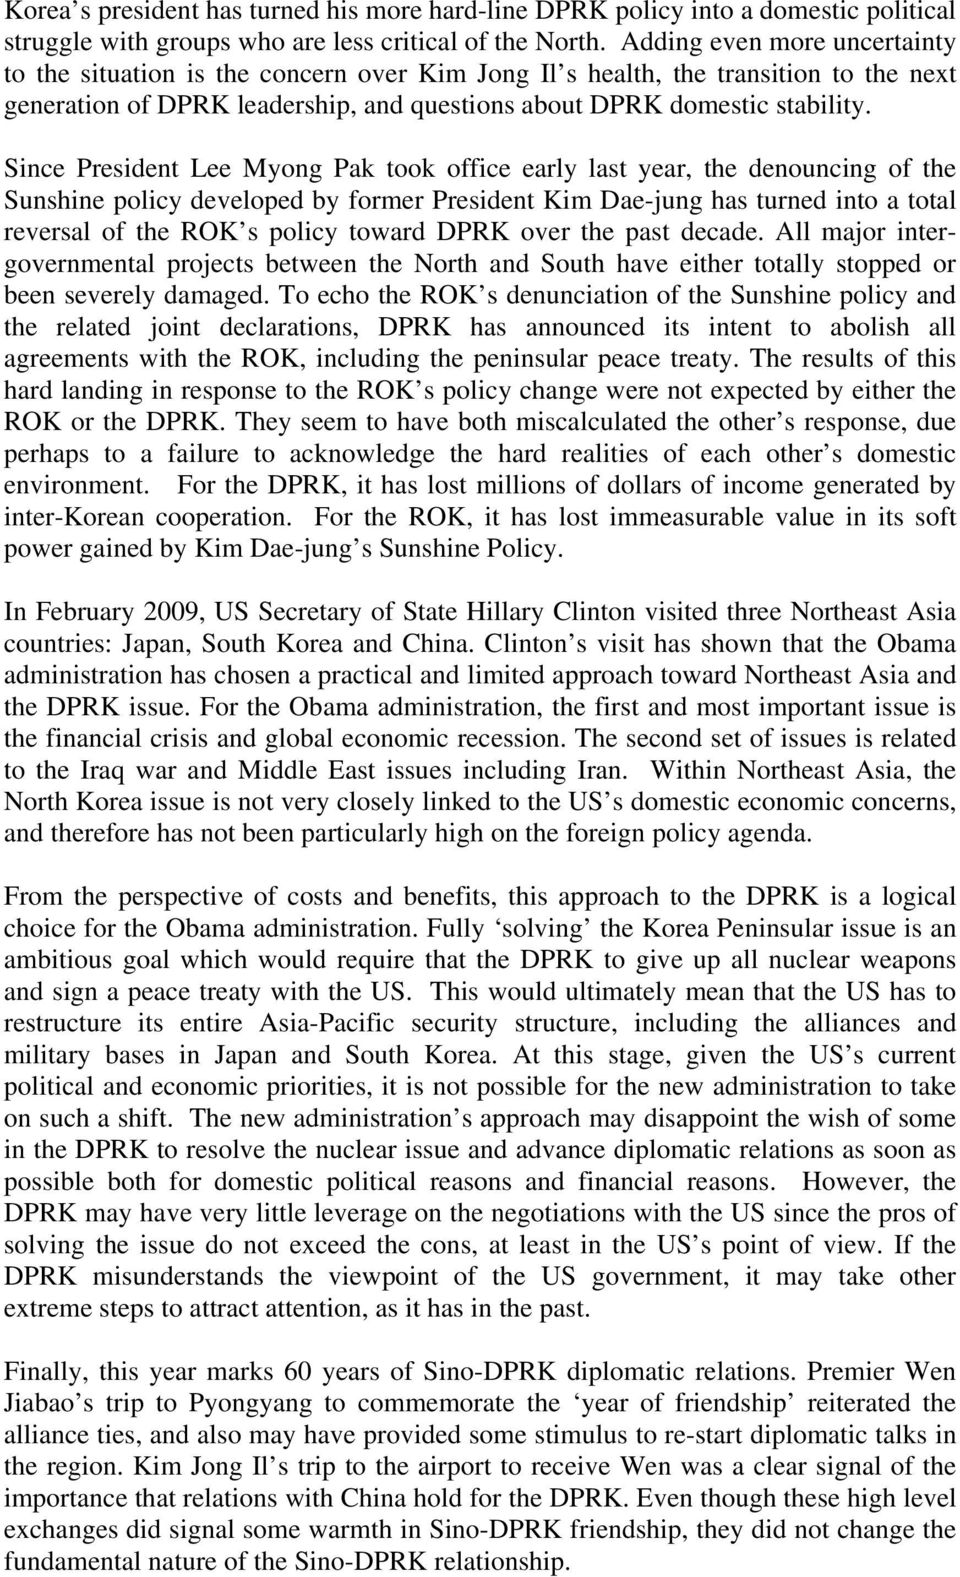 Since President Lee Myong Pak took office early last year, the denouncing of the Sunshine policy developed by former President Kim Dae-jung has turned into a total reversal of the ROK s policy toward